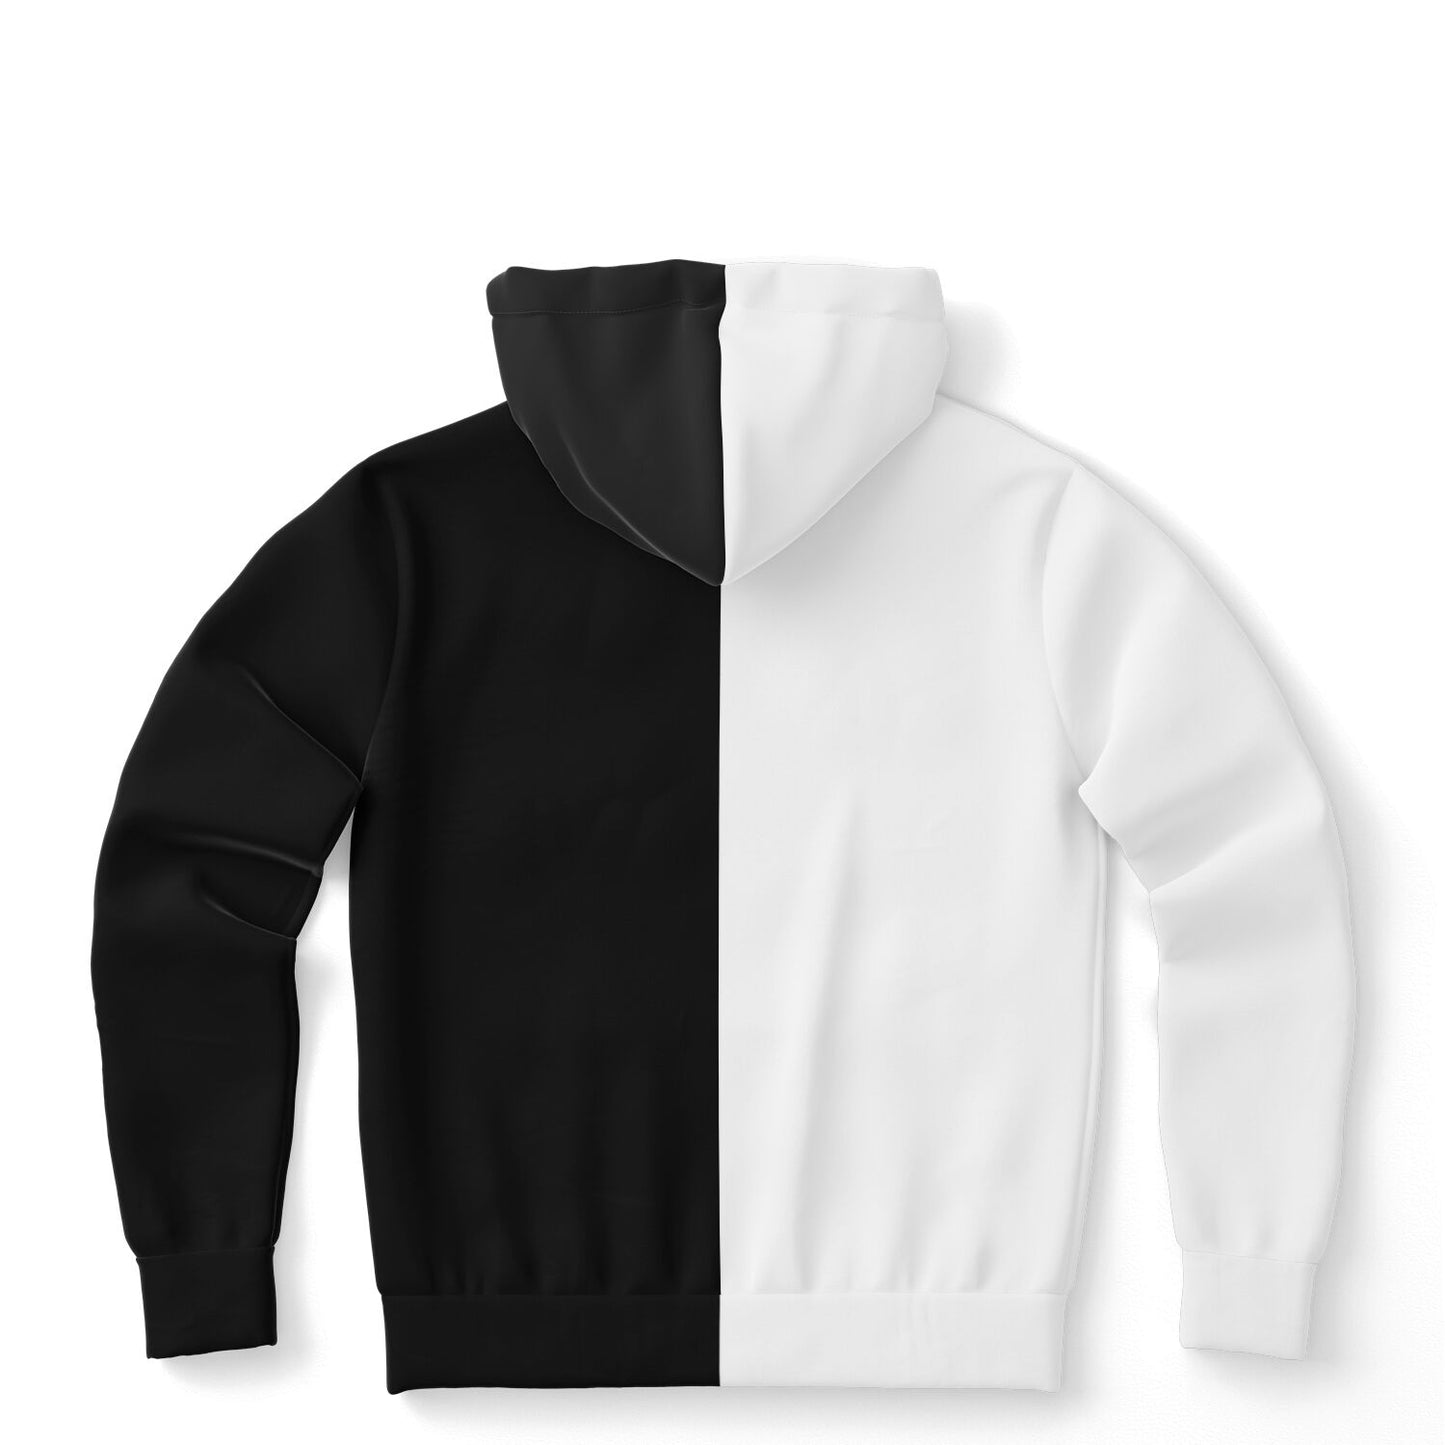 Half Black and Half White Hoodie, Two Tone Pullover Men Women Adult Aesthetic Graphic Cotton Hooded Sweatshirt with Pockets